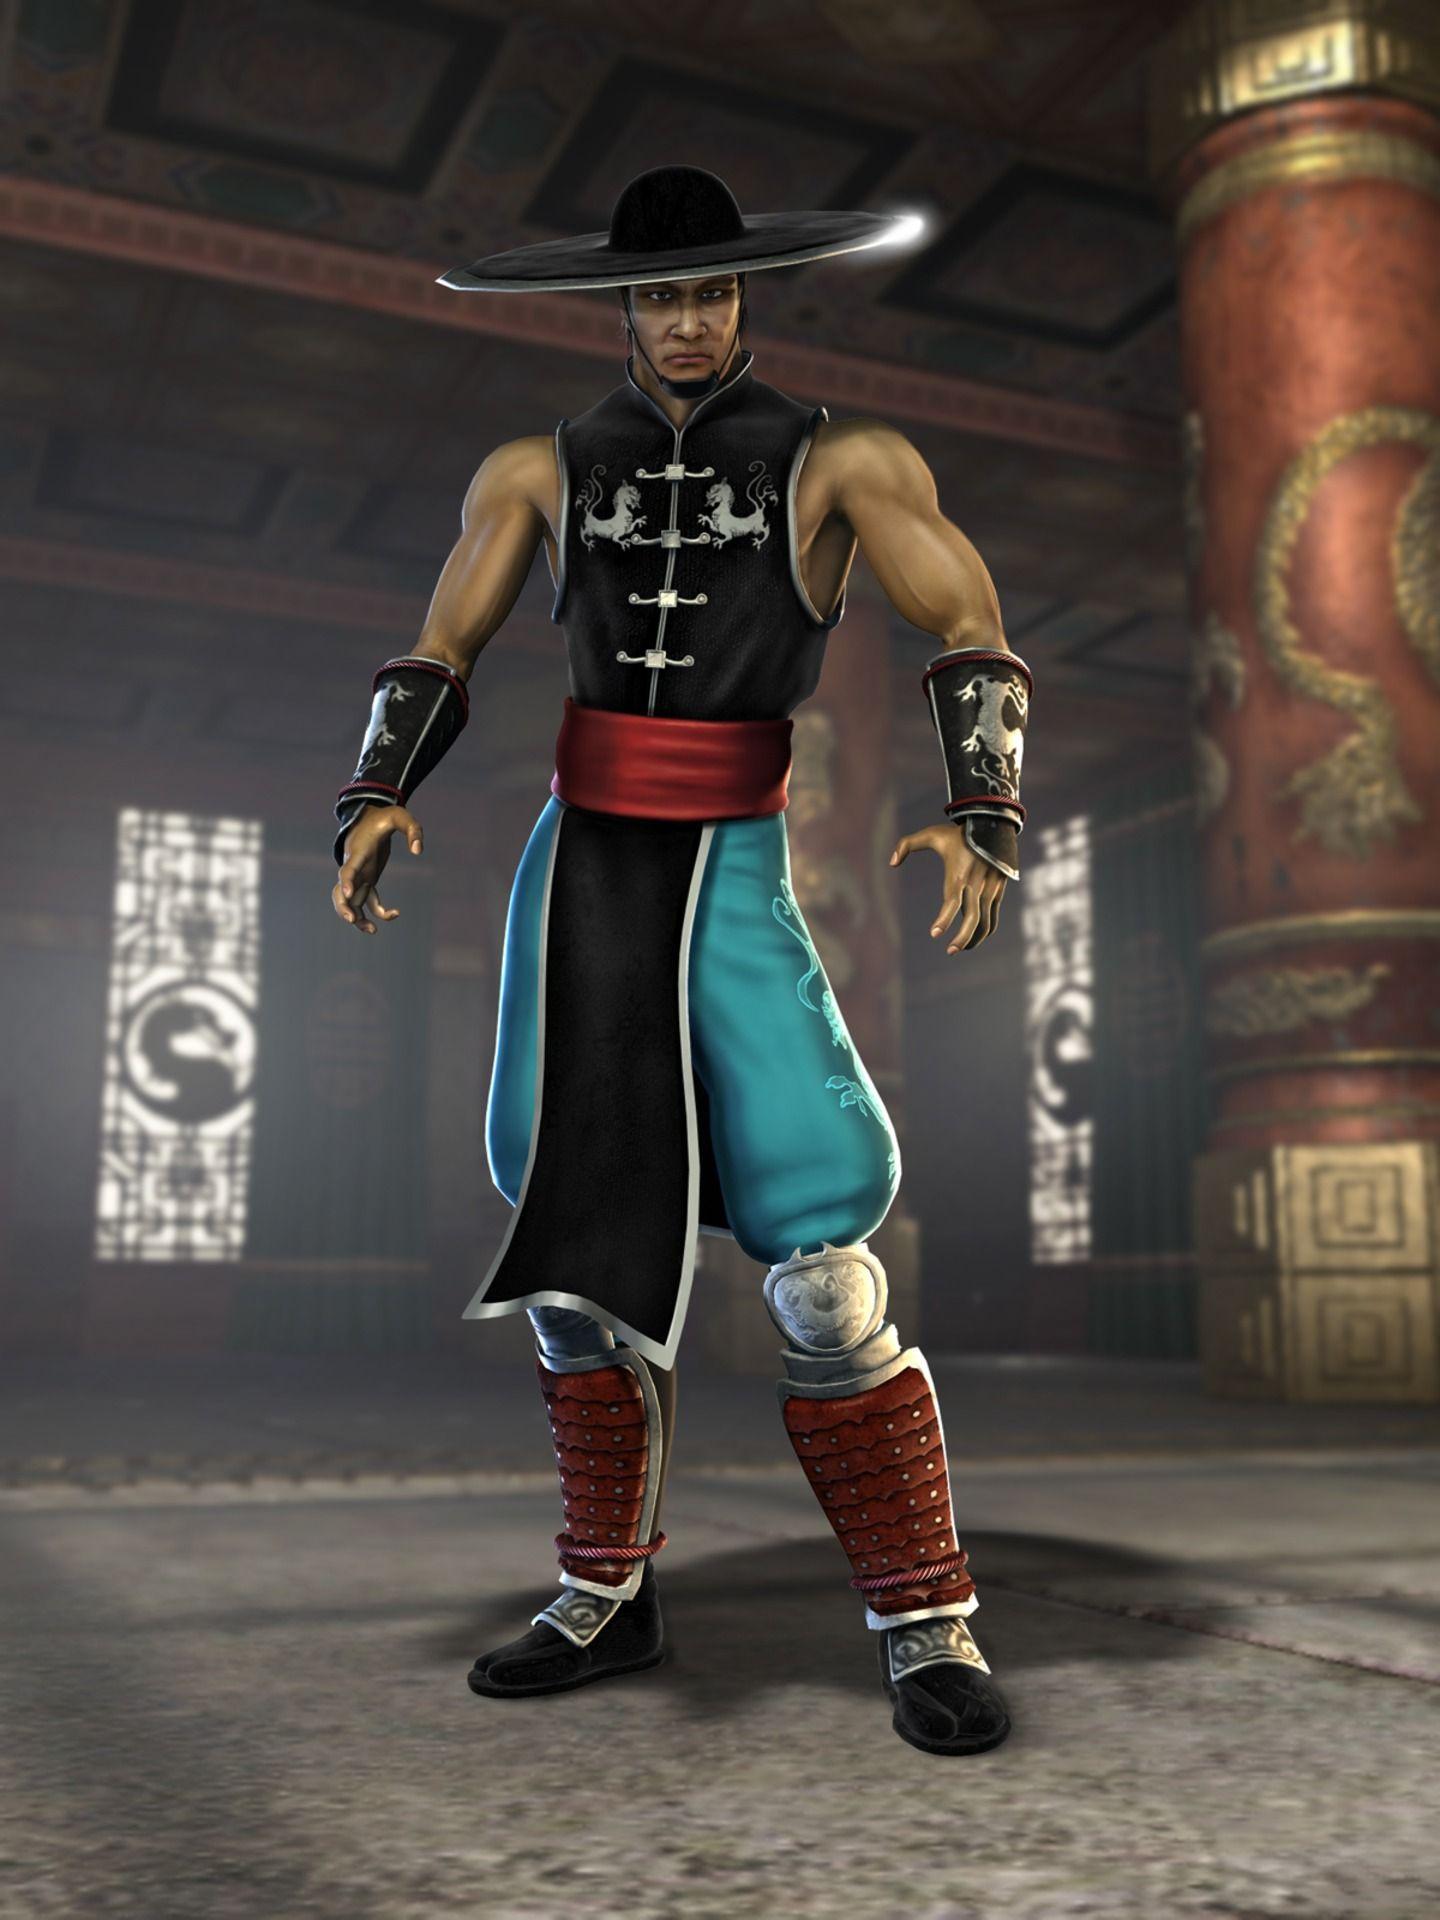 What Mortal Kombat character are you? [explain why]-Topic